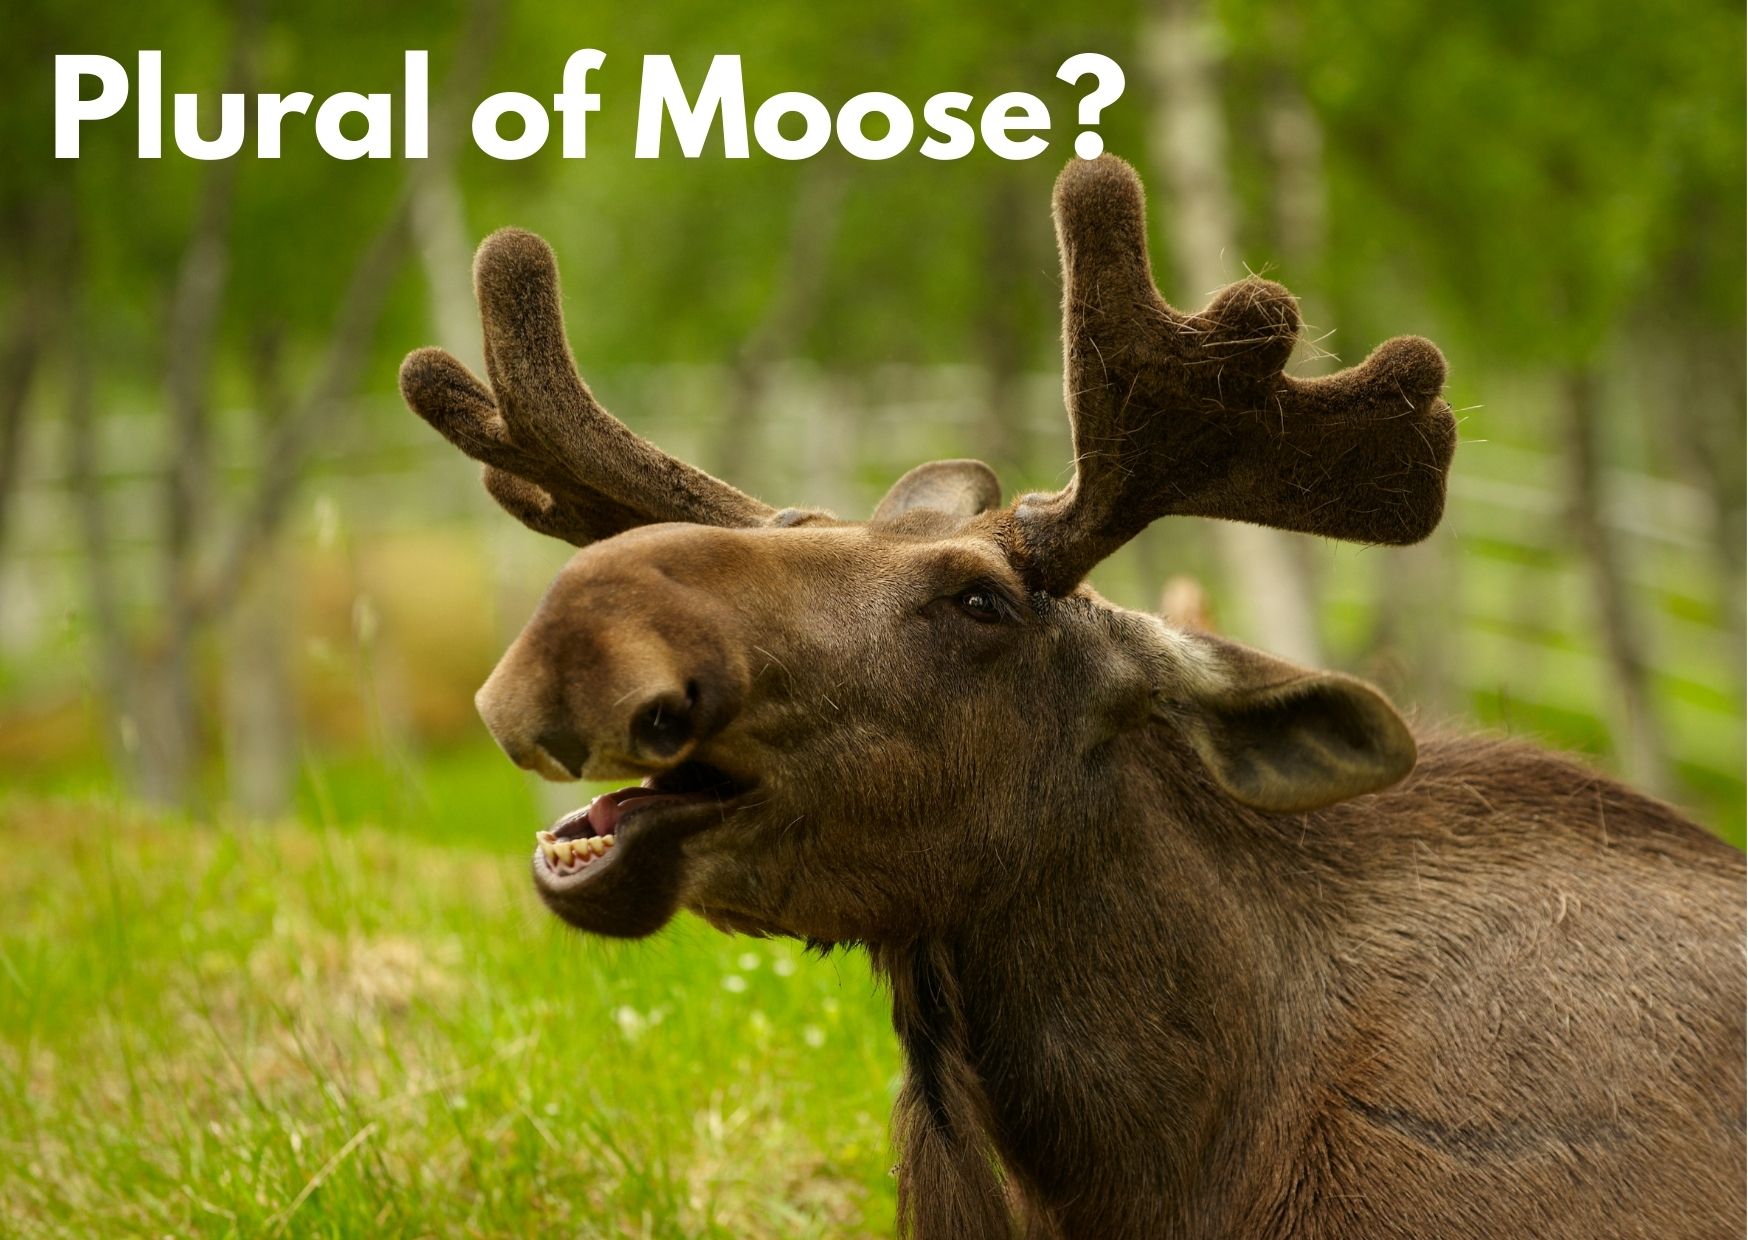 Picture of a Moose with the caption: "Plural of Moose"